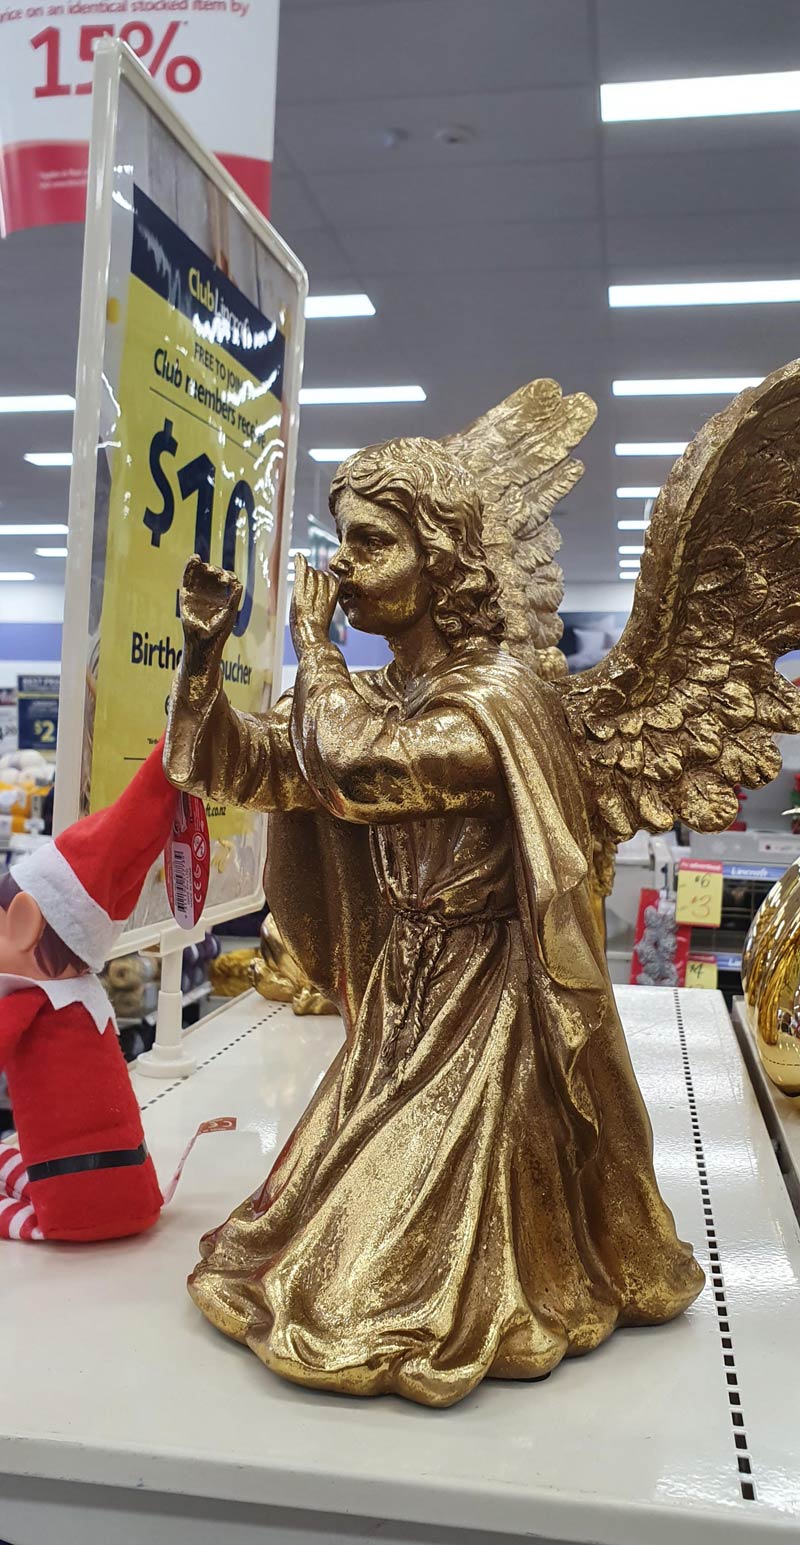 Christmas angel has lost her trumpet